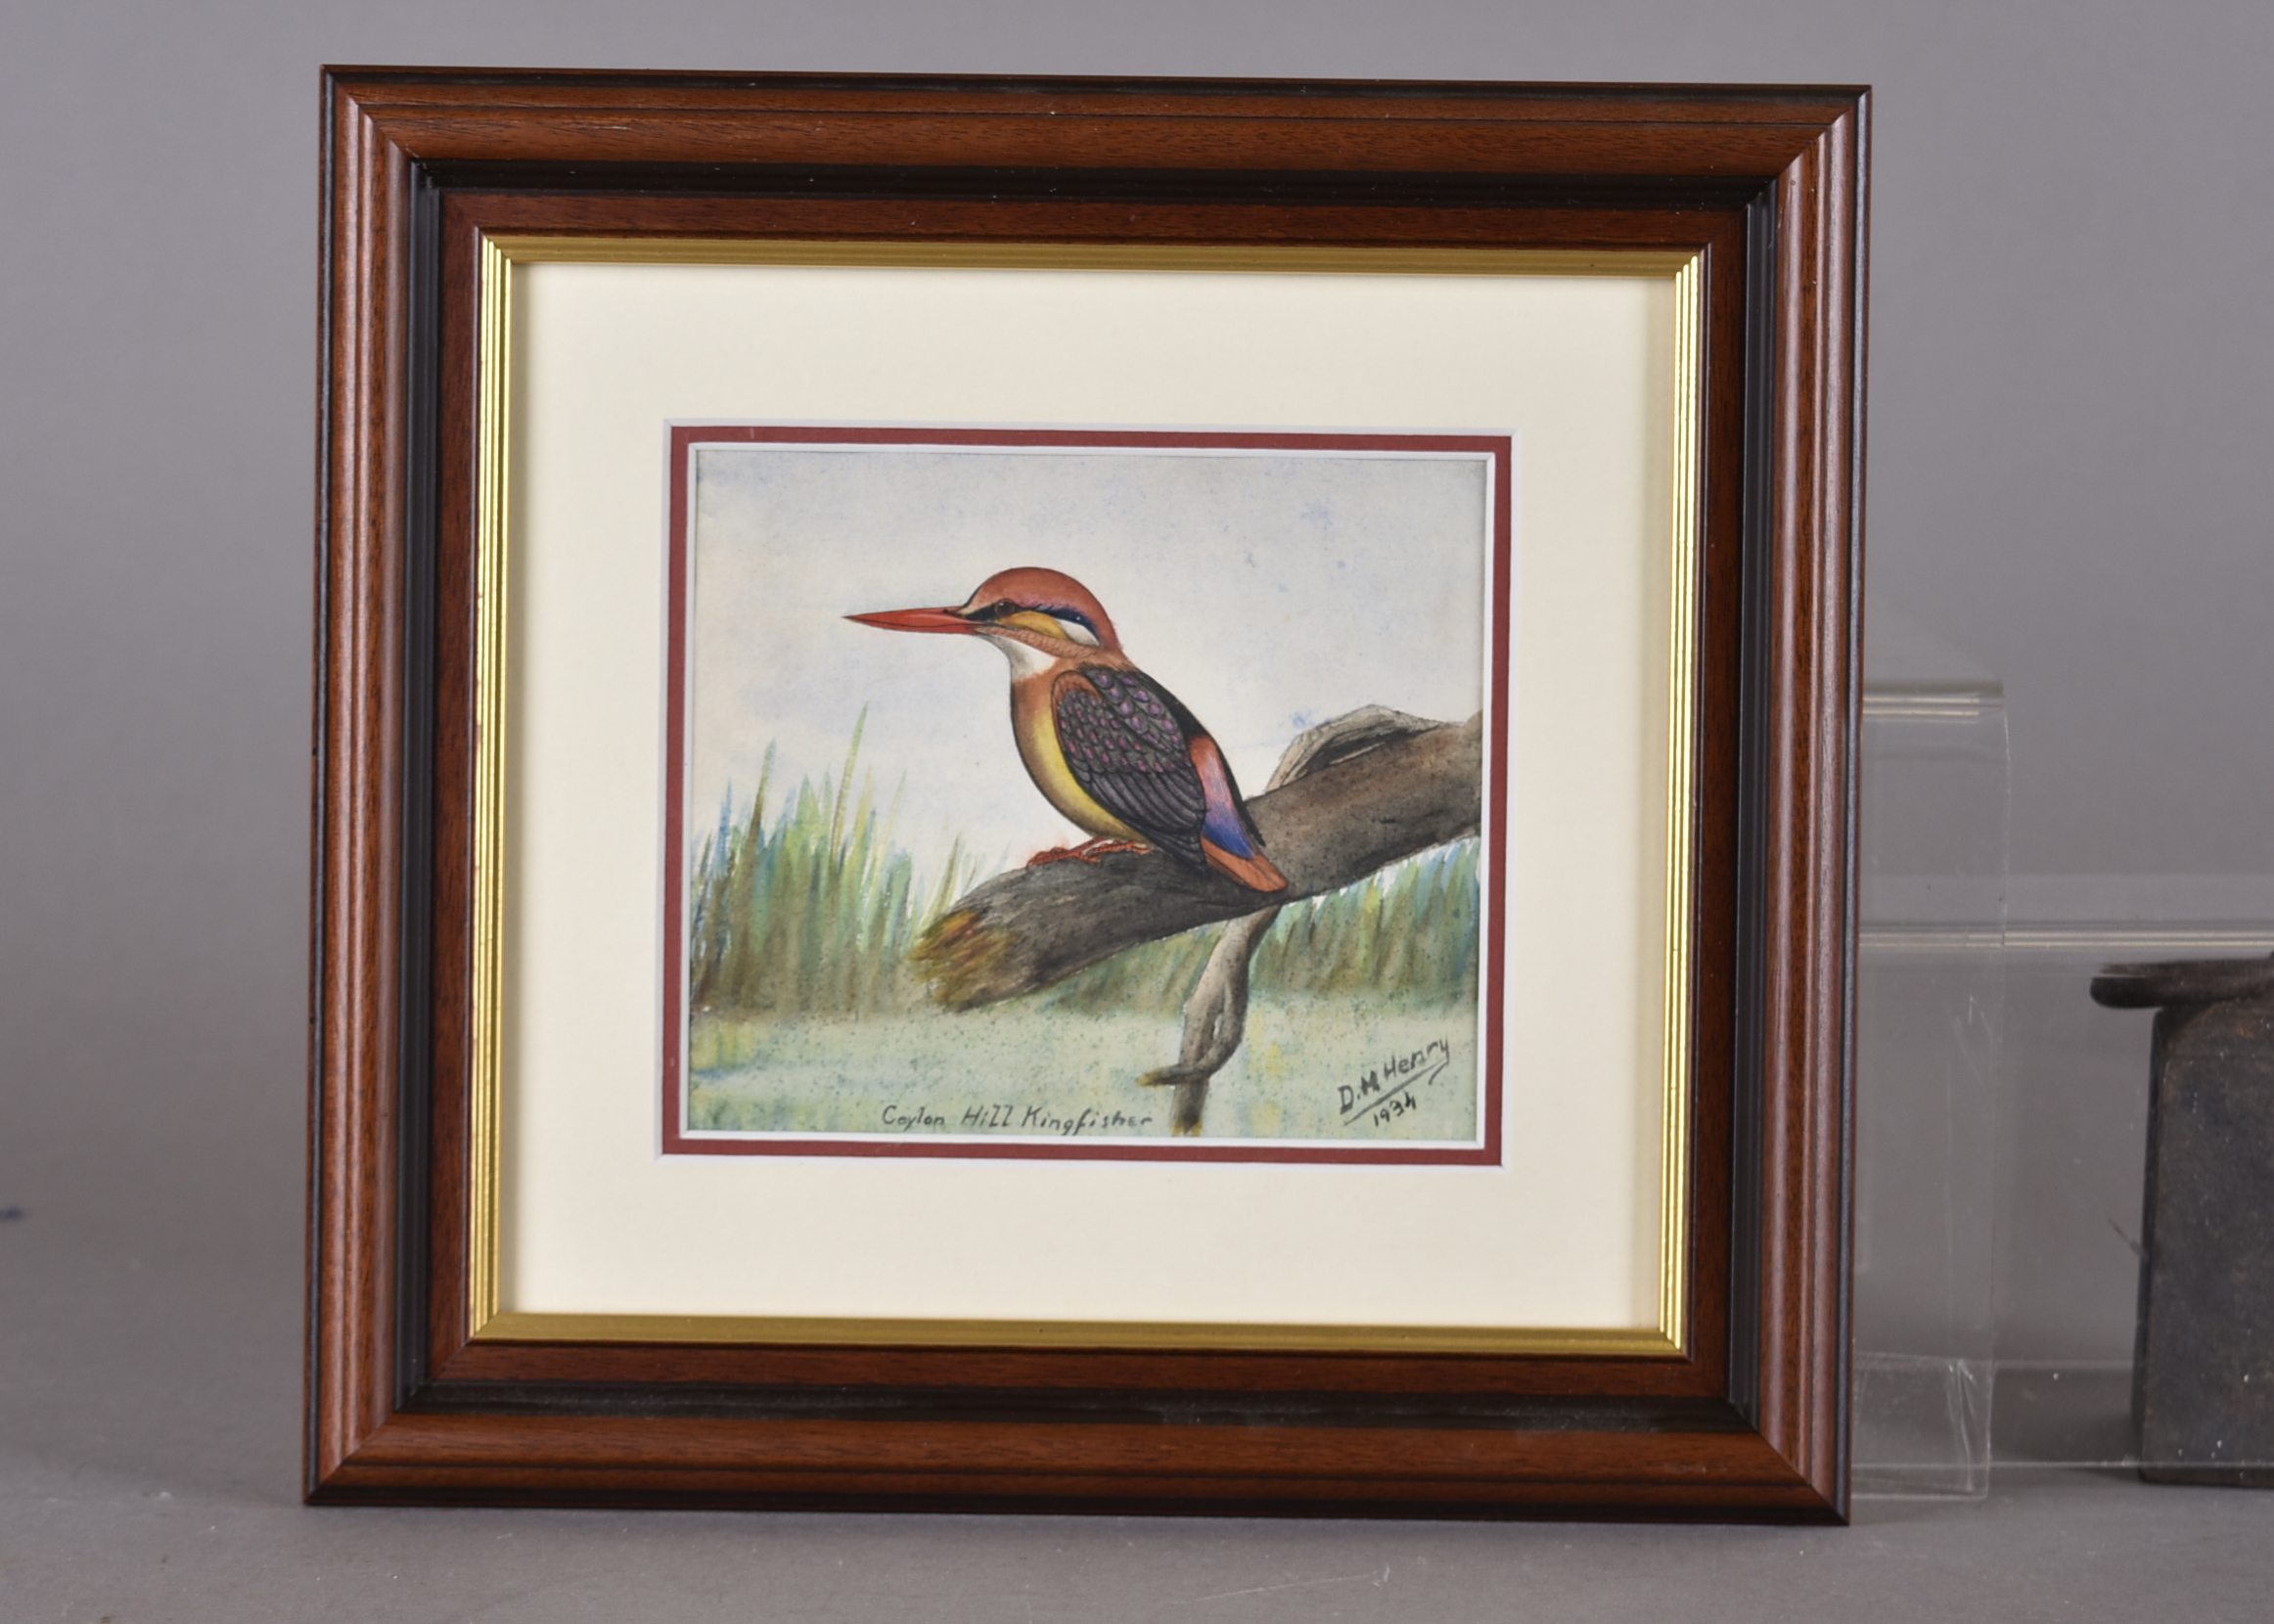 •David Morrison Reid-Henry (1919-1977) watercolour on paper, 'Ceylon Hill Kingfisher', signed and - Image 2 of 2